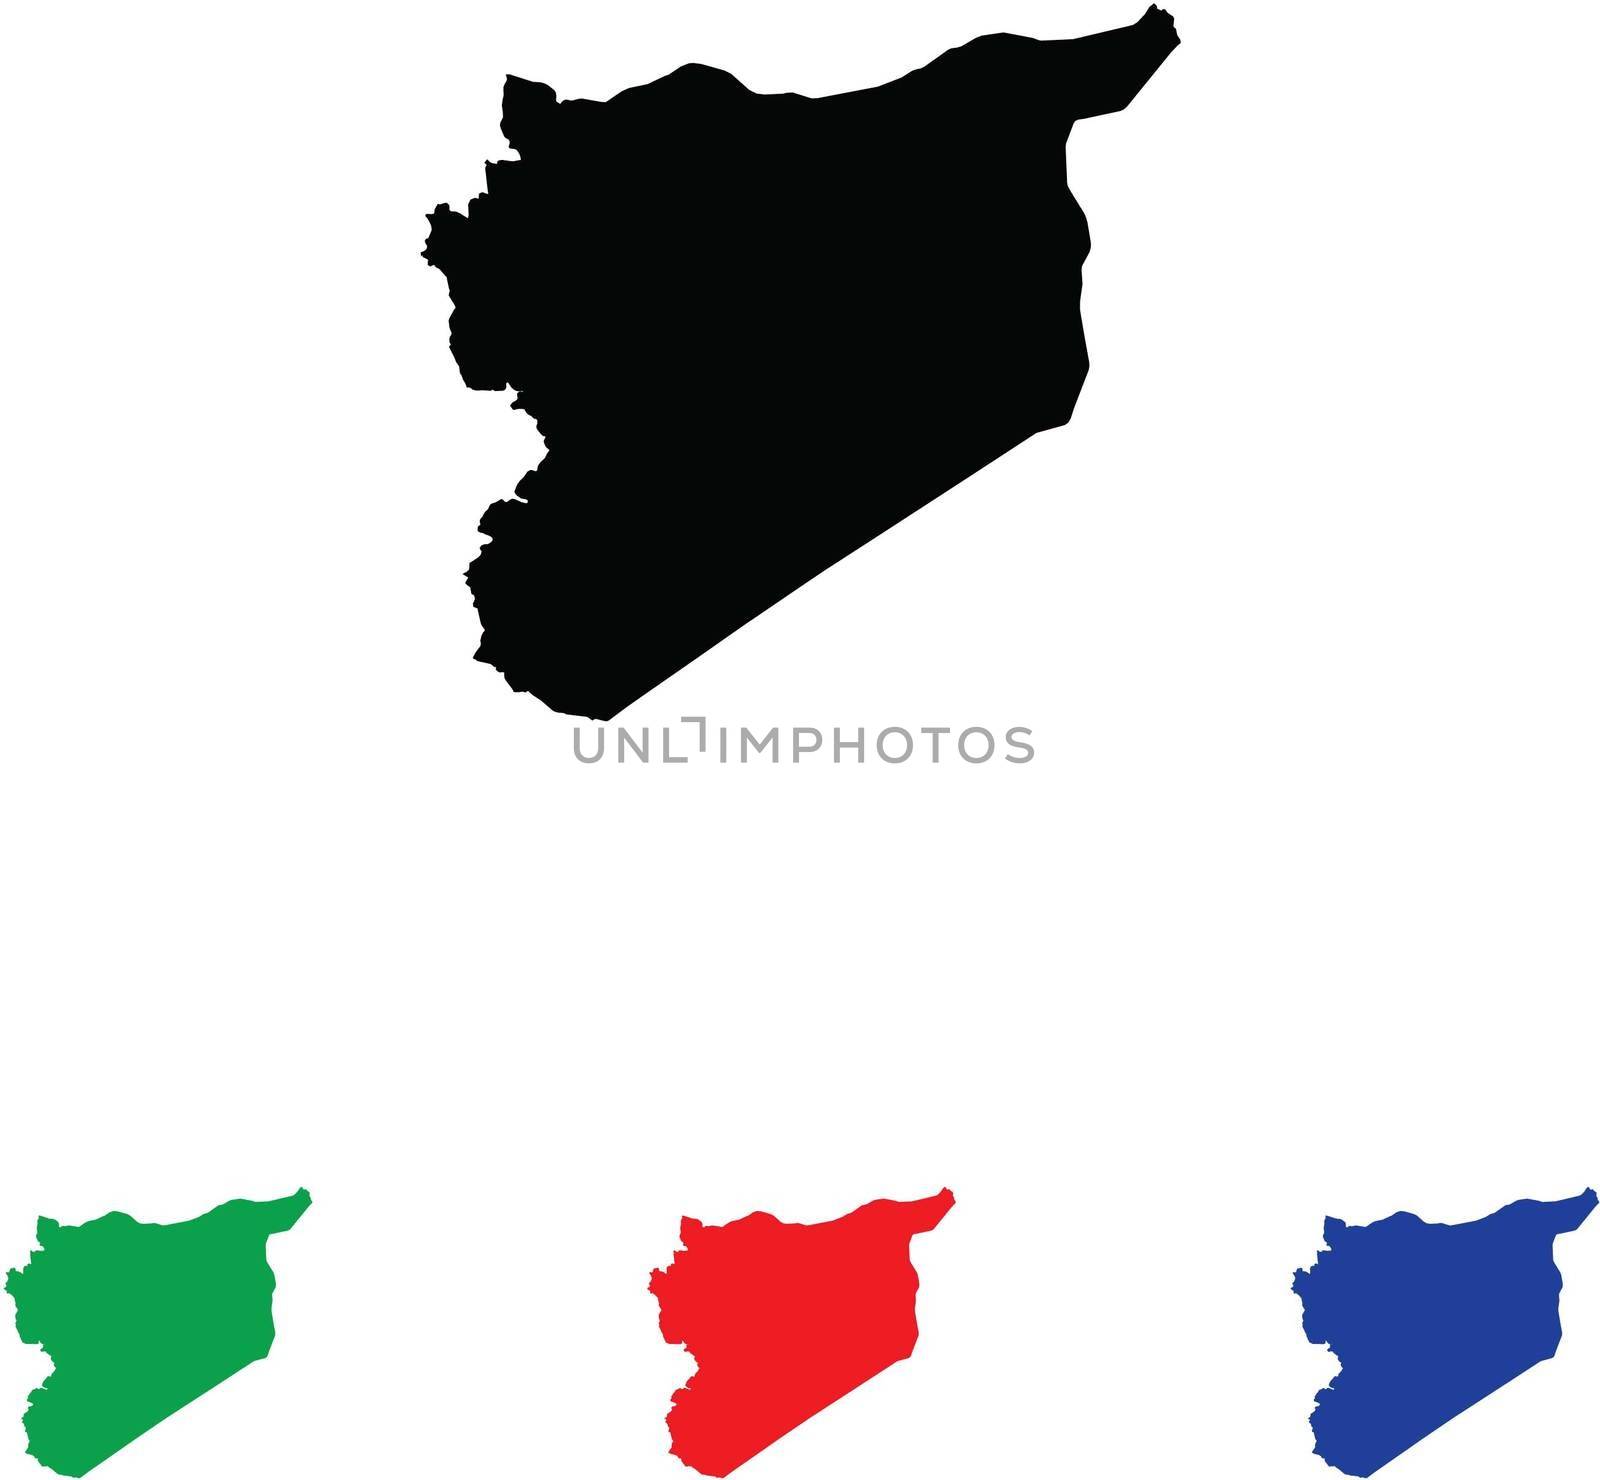 Syria Icon Illustration with Four Color Variations